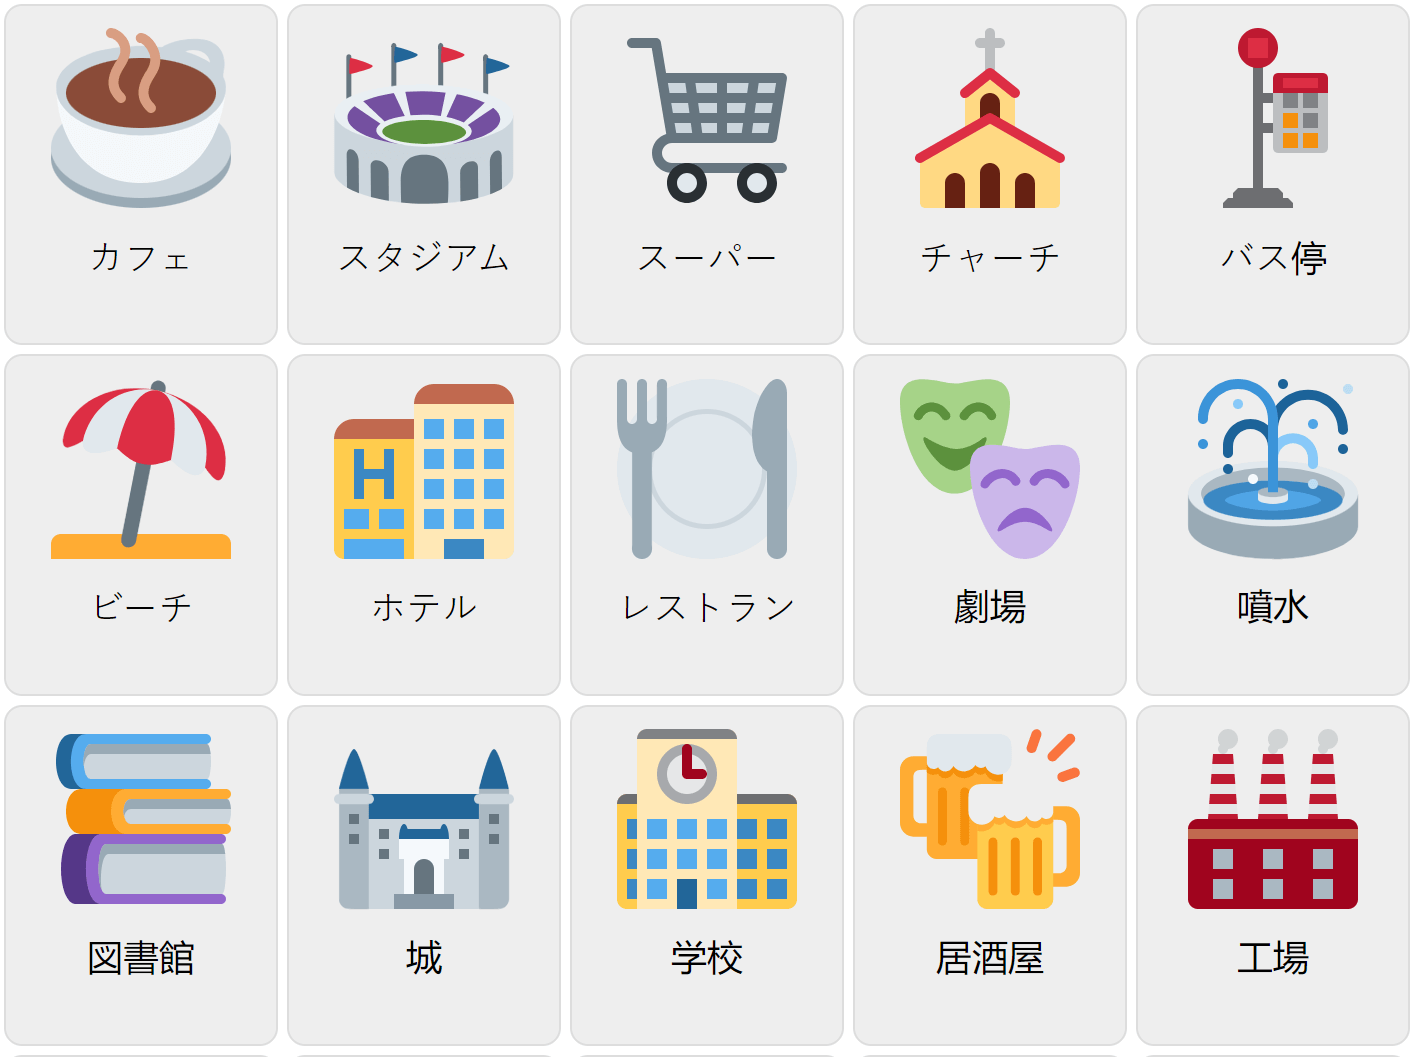 Places in a Town in Japanese